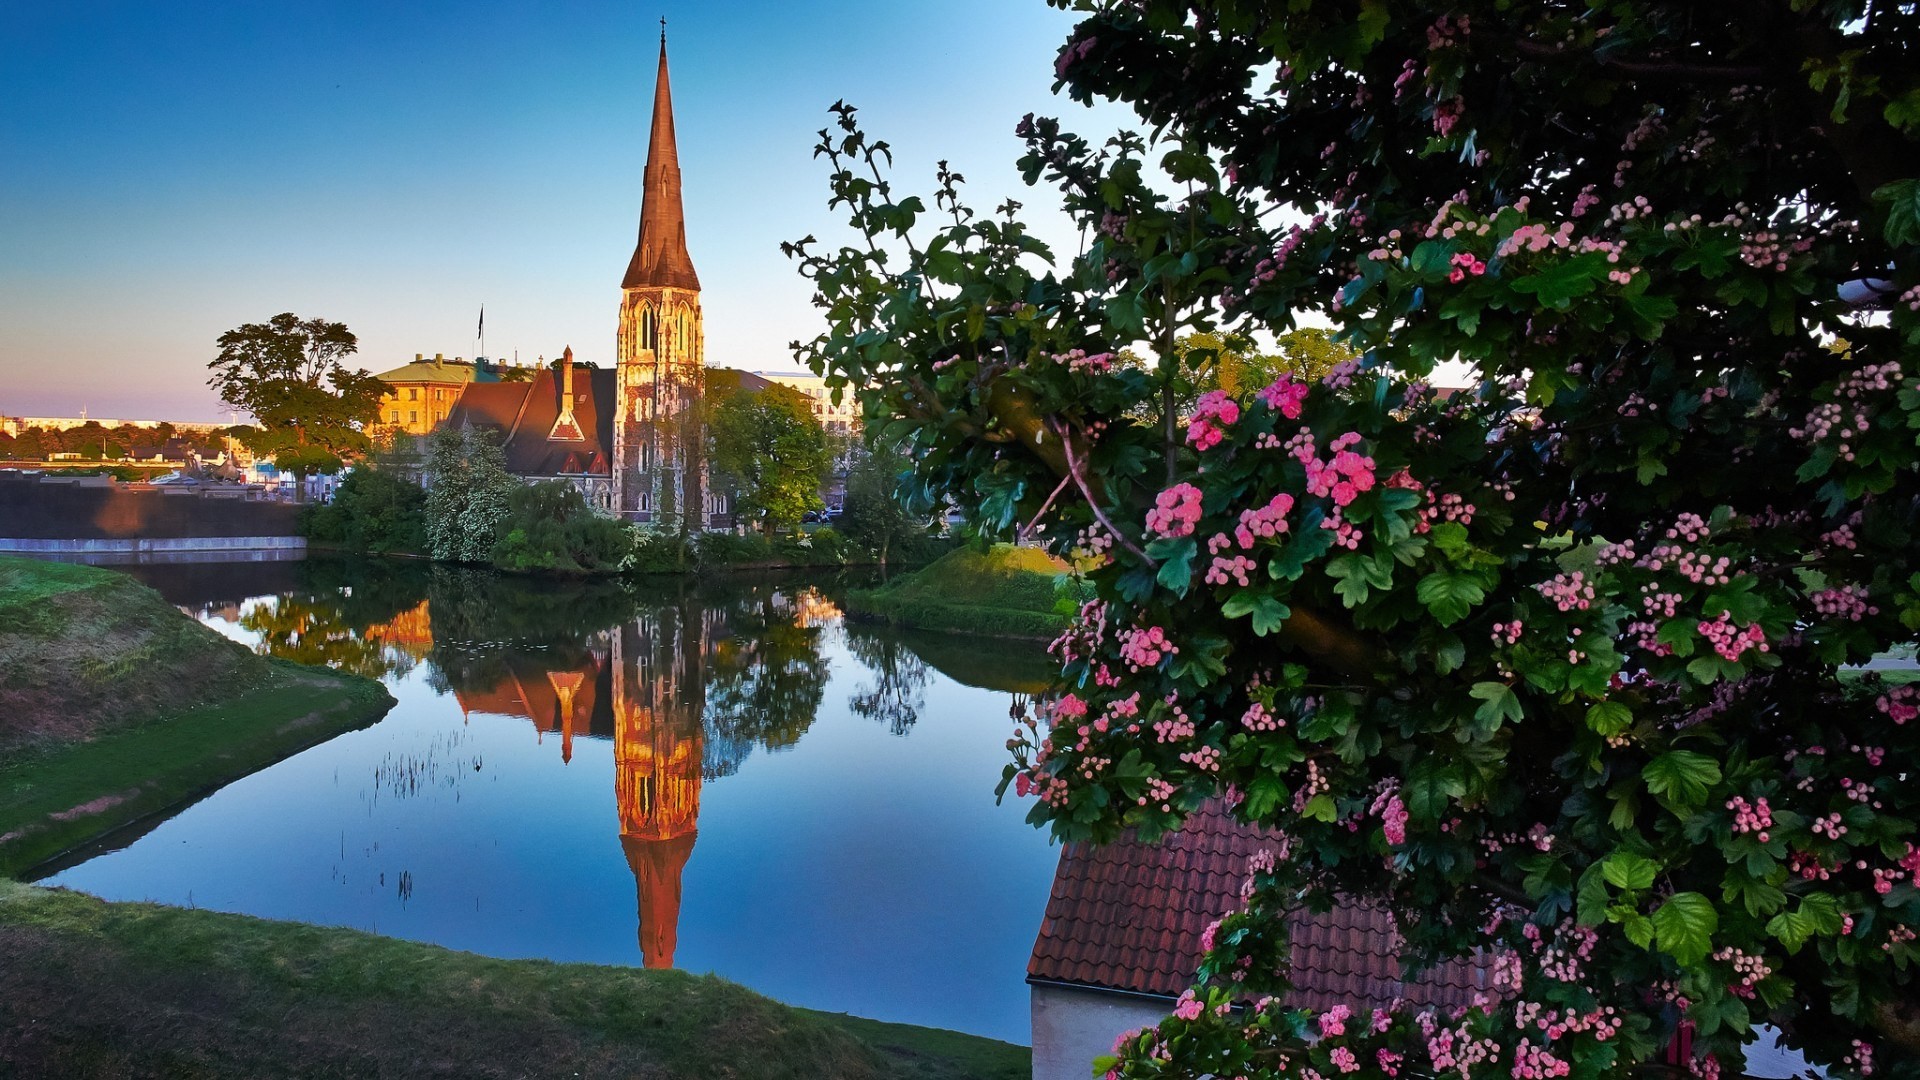 General 1920x1080 architecture house trees branch Copenhagen Denmark church tower water reflection flowers leaves clear sky